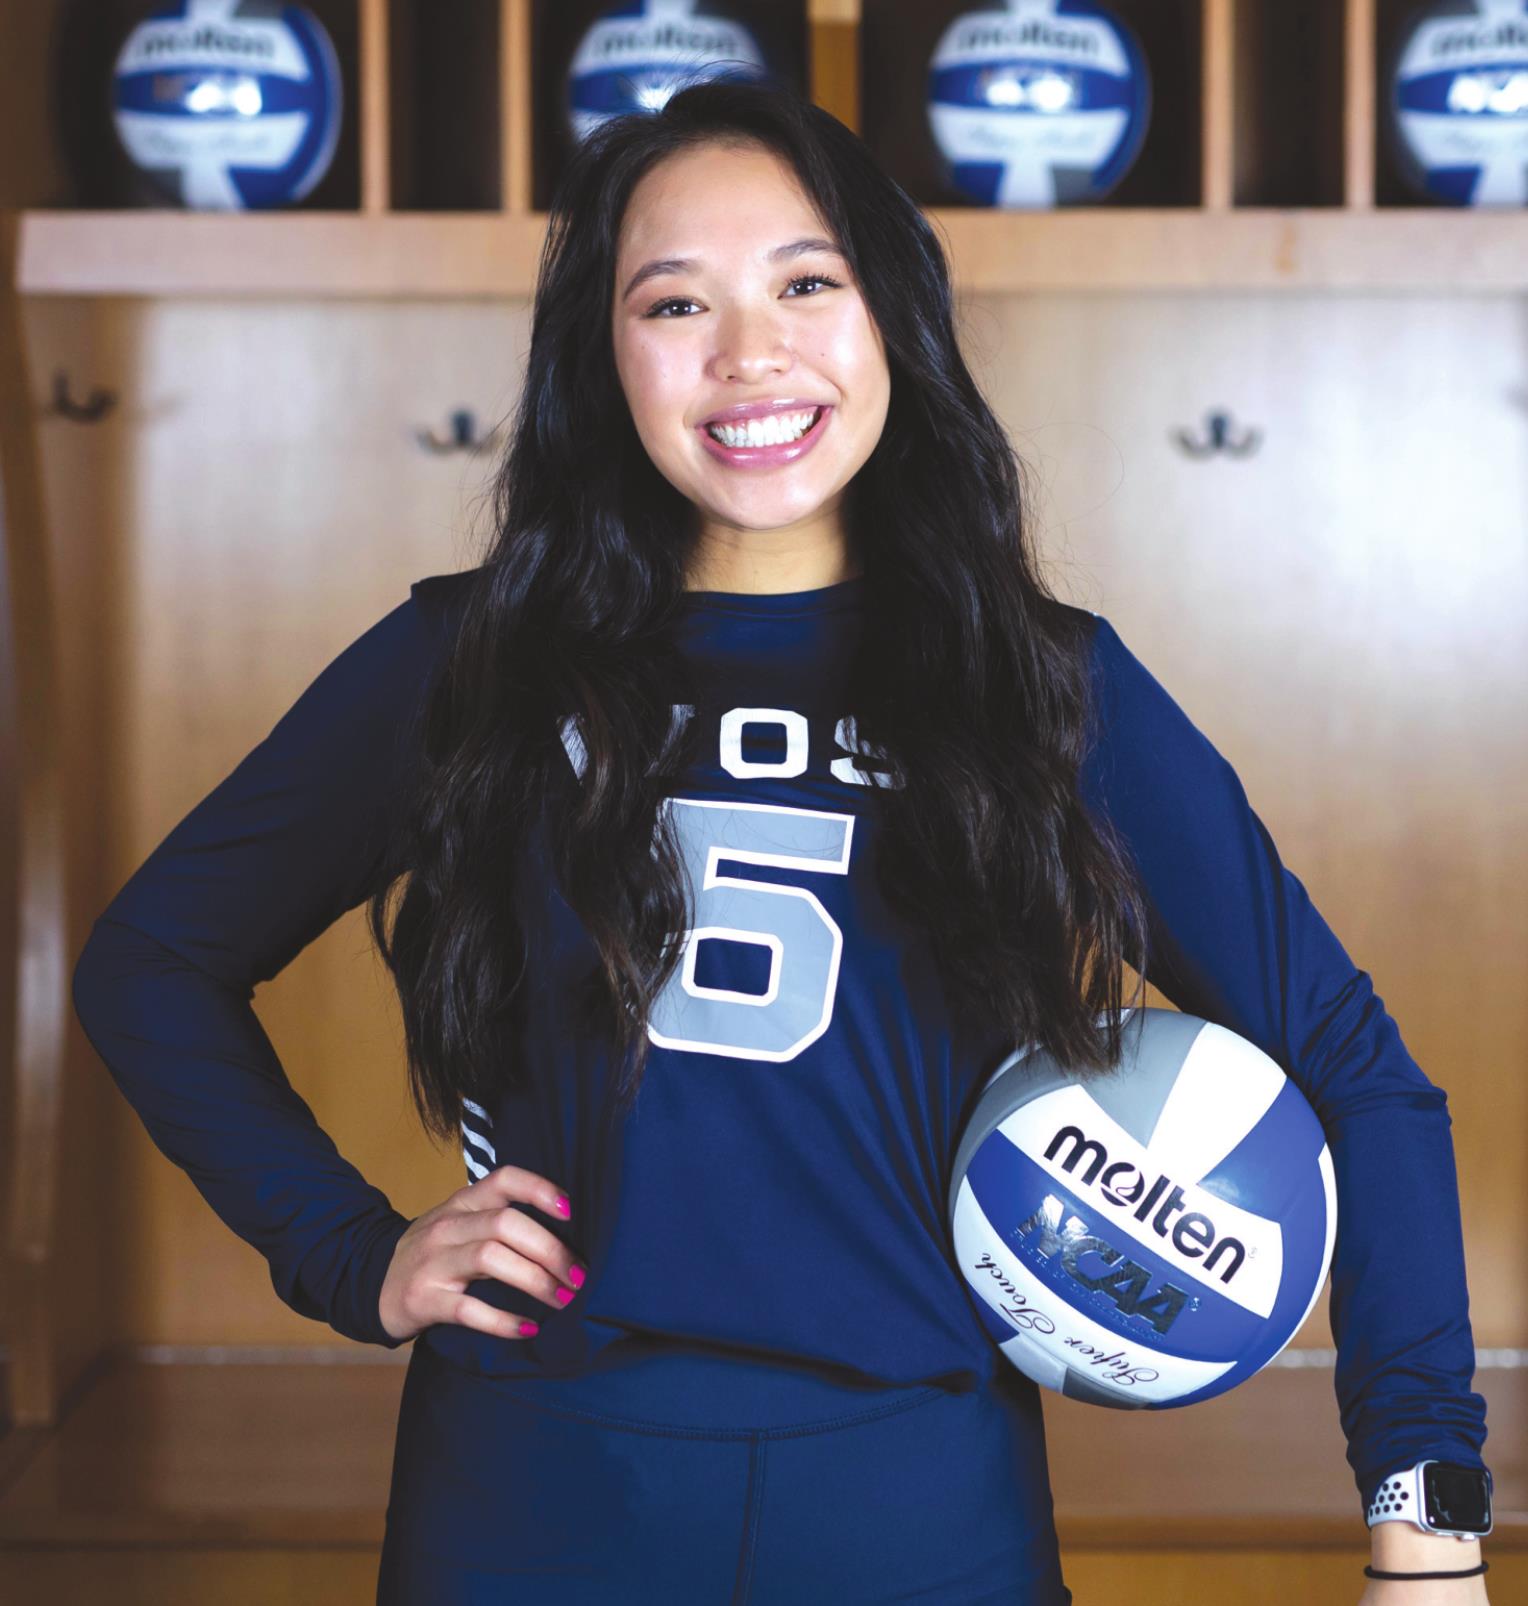 Senior SWOSU volleyball player Allie Hoang came on a visit and fell in love with SWOSU and knew she made the right choice coming to SWOSU. Provided